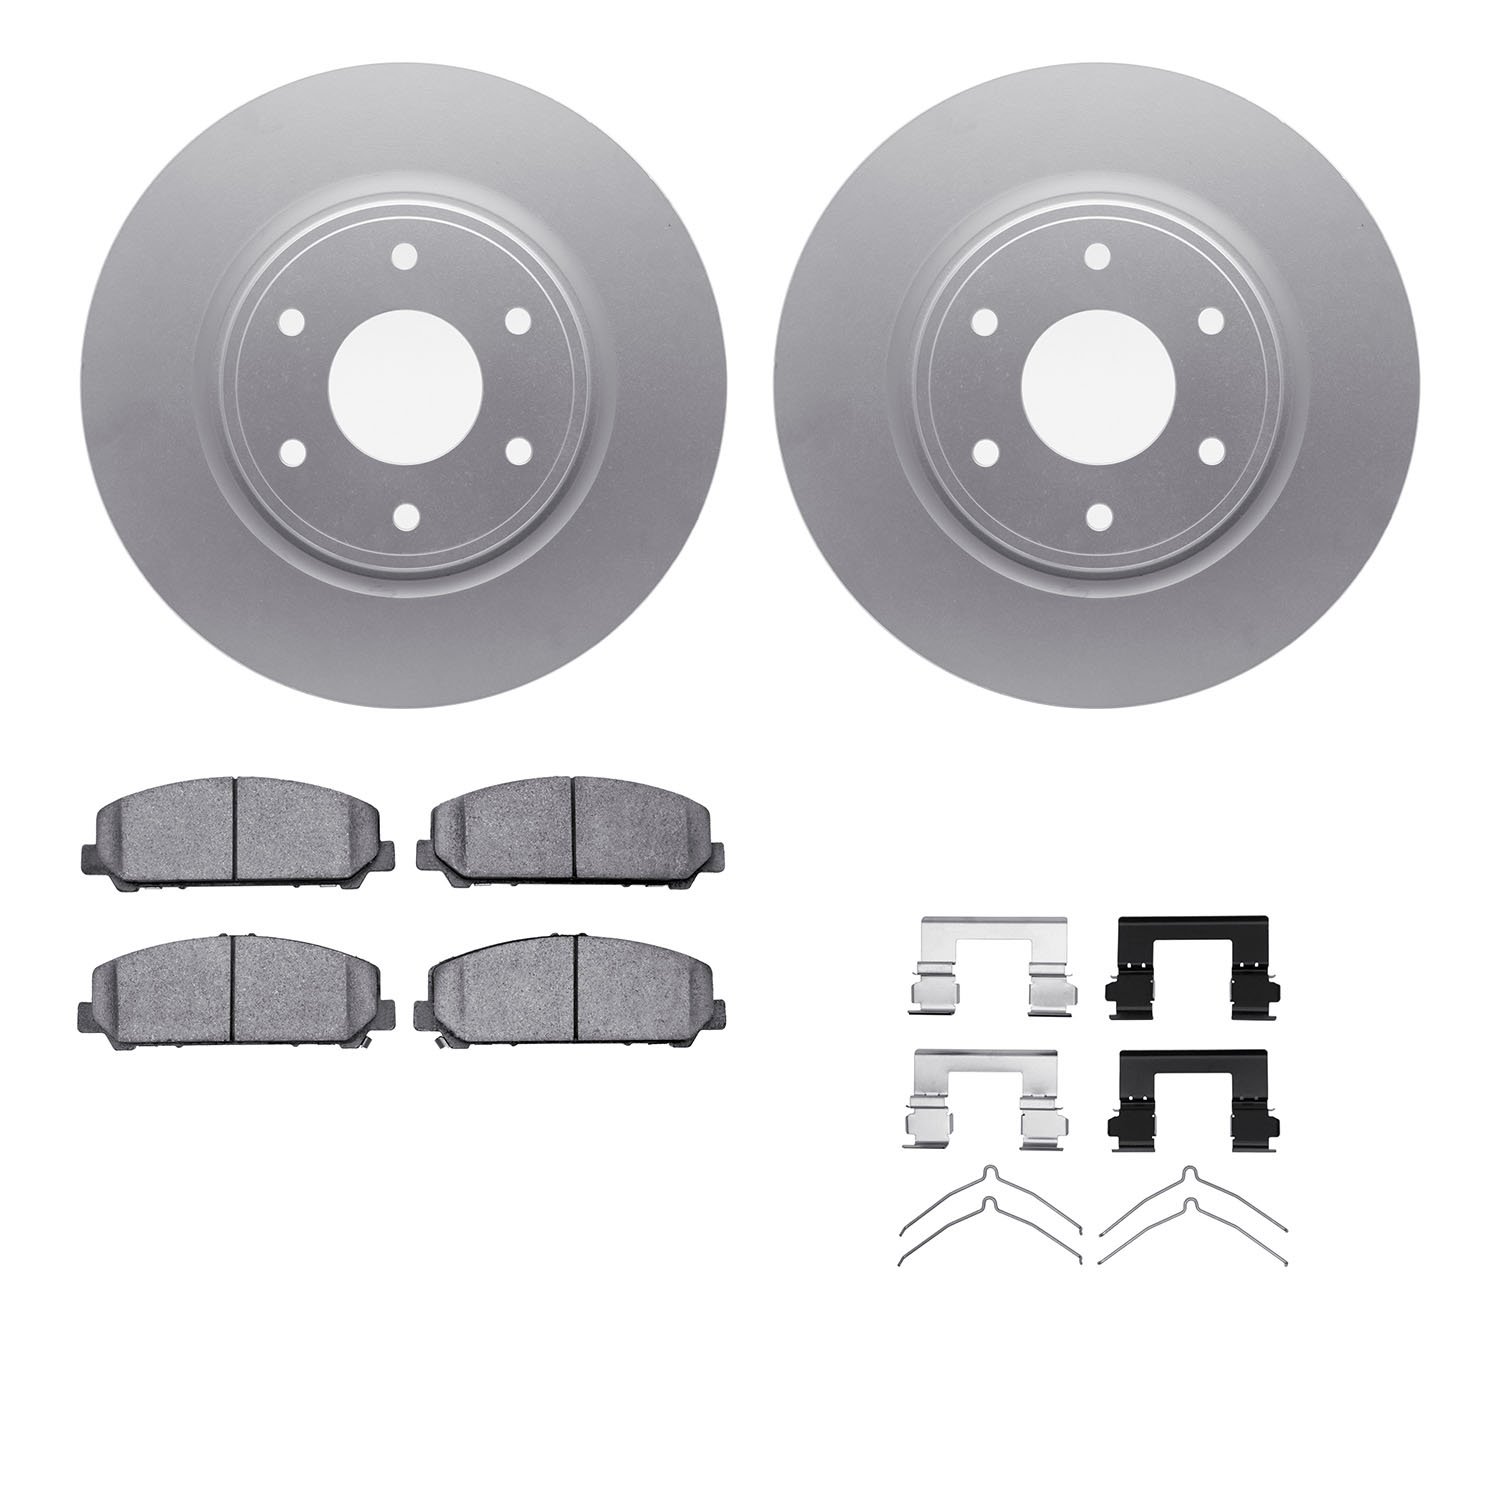 4412-67004 Geospec Brake Rotors with Ultimate-Duty Brake Pads & Hardware, 2005-2007 Infiniti/Nissan, Position: Front